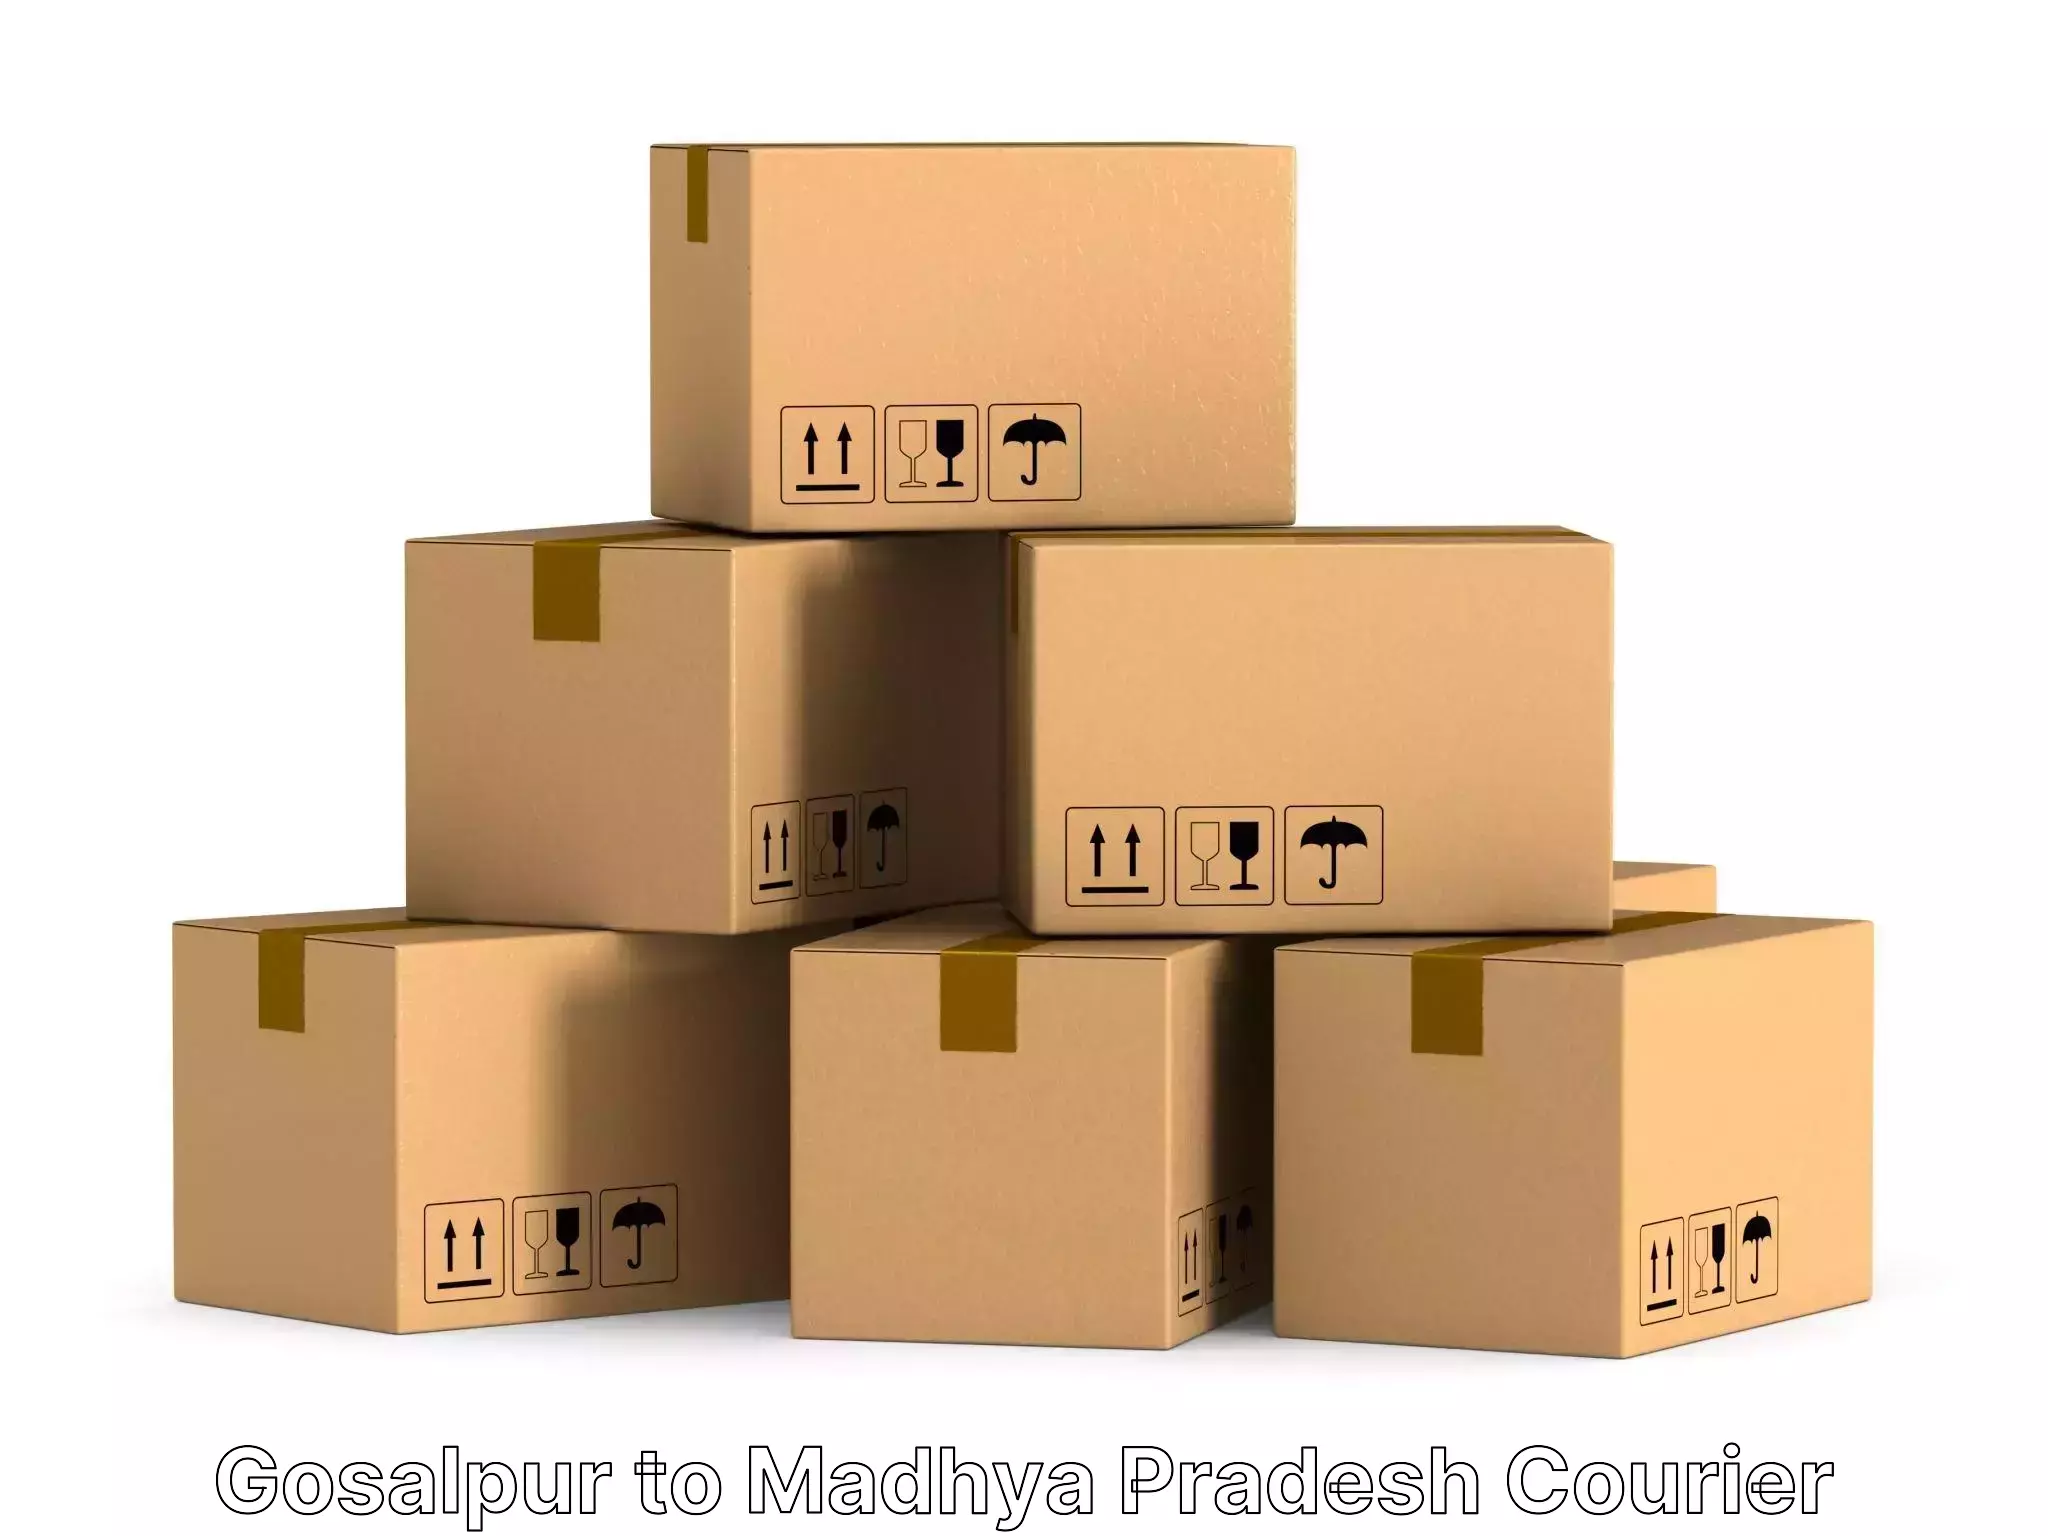 Advanced moving services in Gosalpur to Begumganj